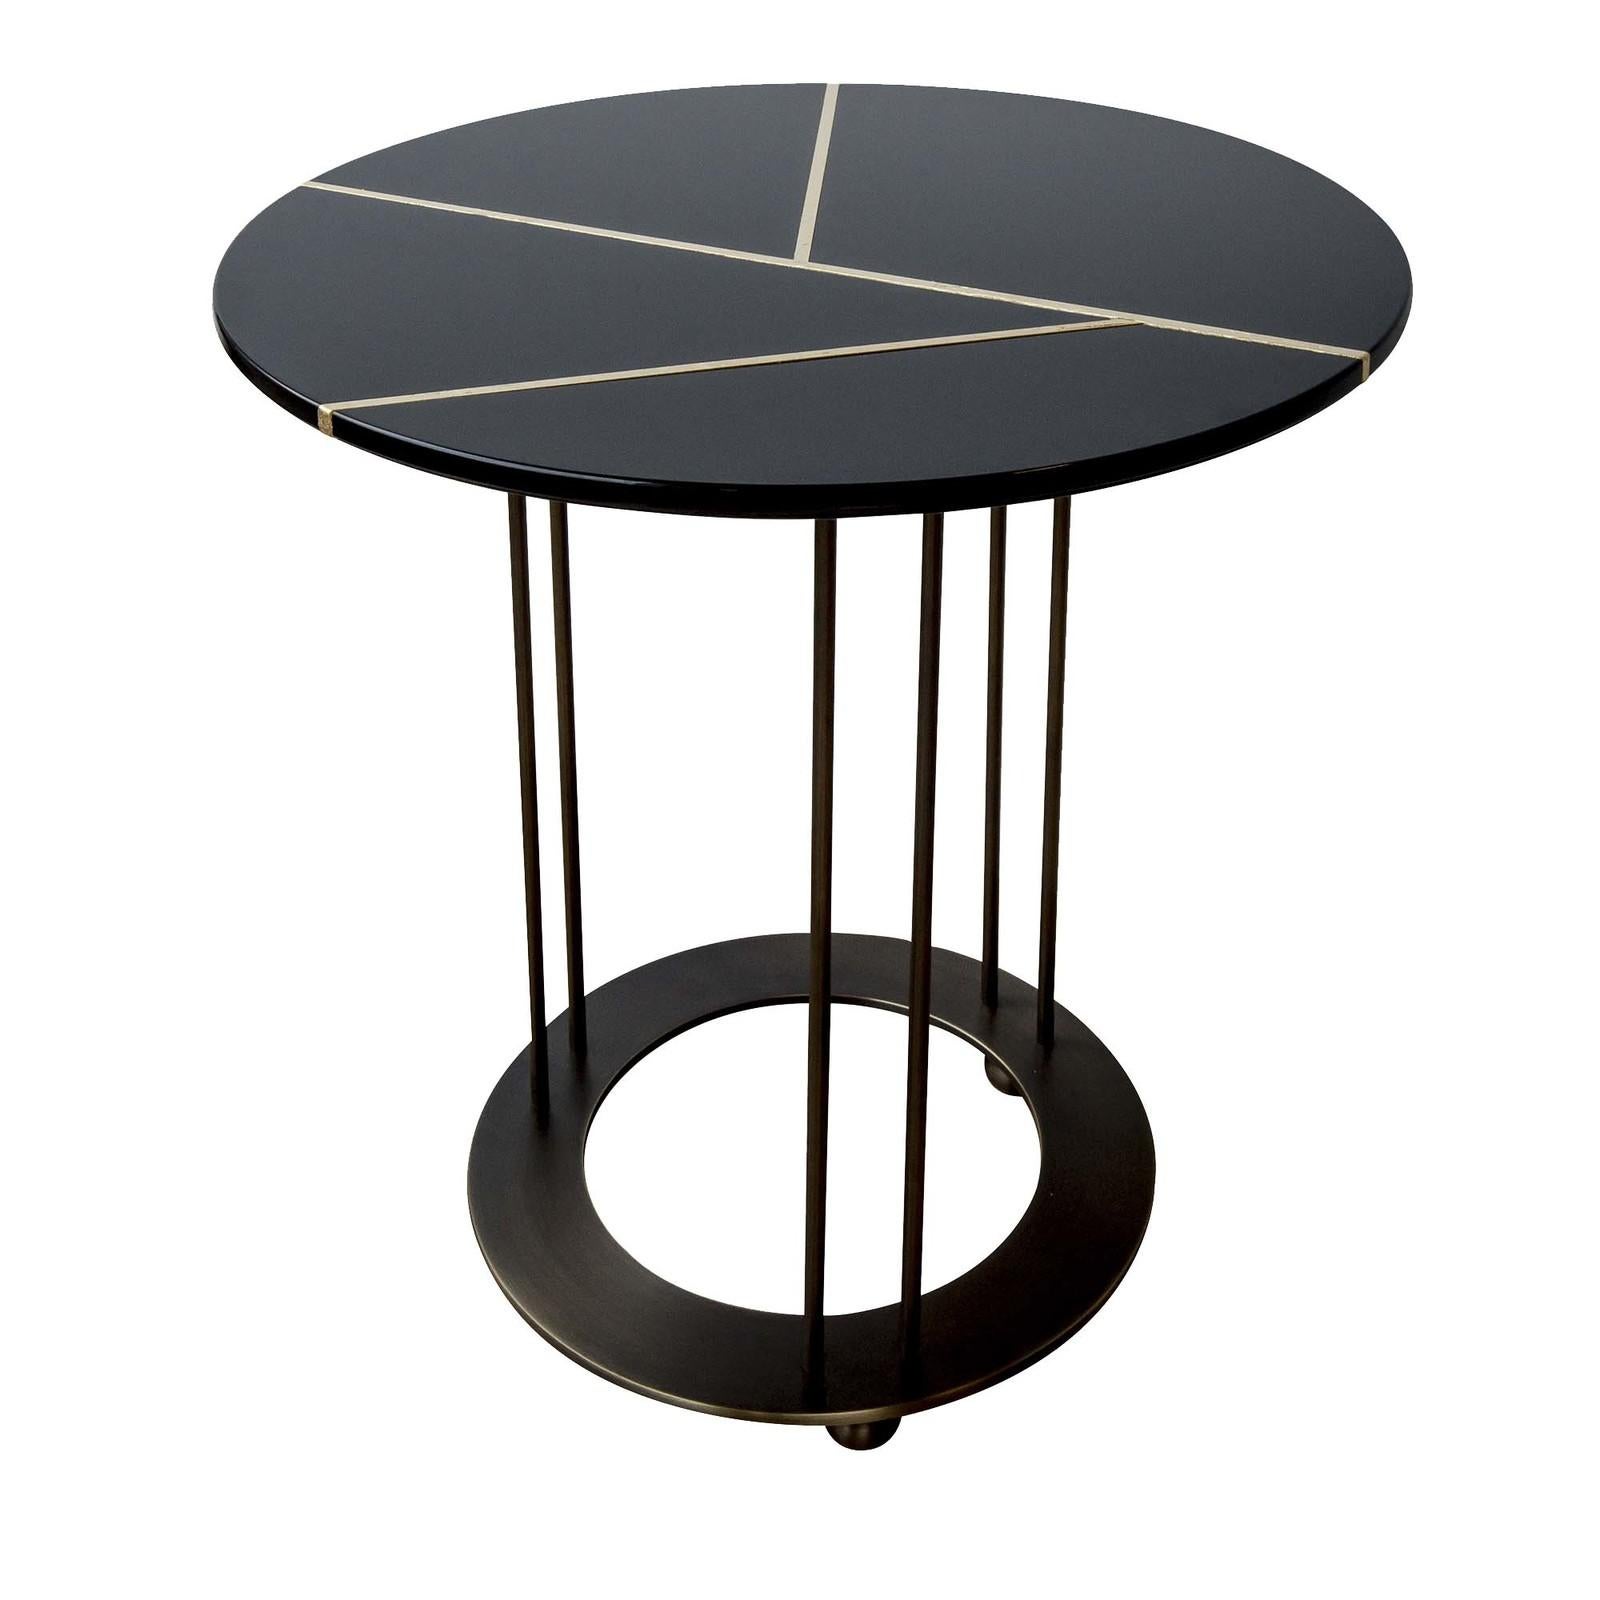 Best paired alongside other side tables from the same series for a dynamic arrangement, this tall side table is defined by its use of textures and geometries. The round wooden top is lacquered with black polyurethane with a shiny finish and features